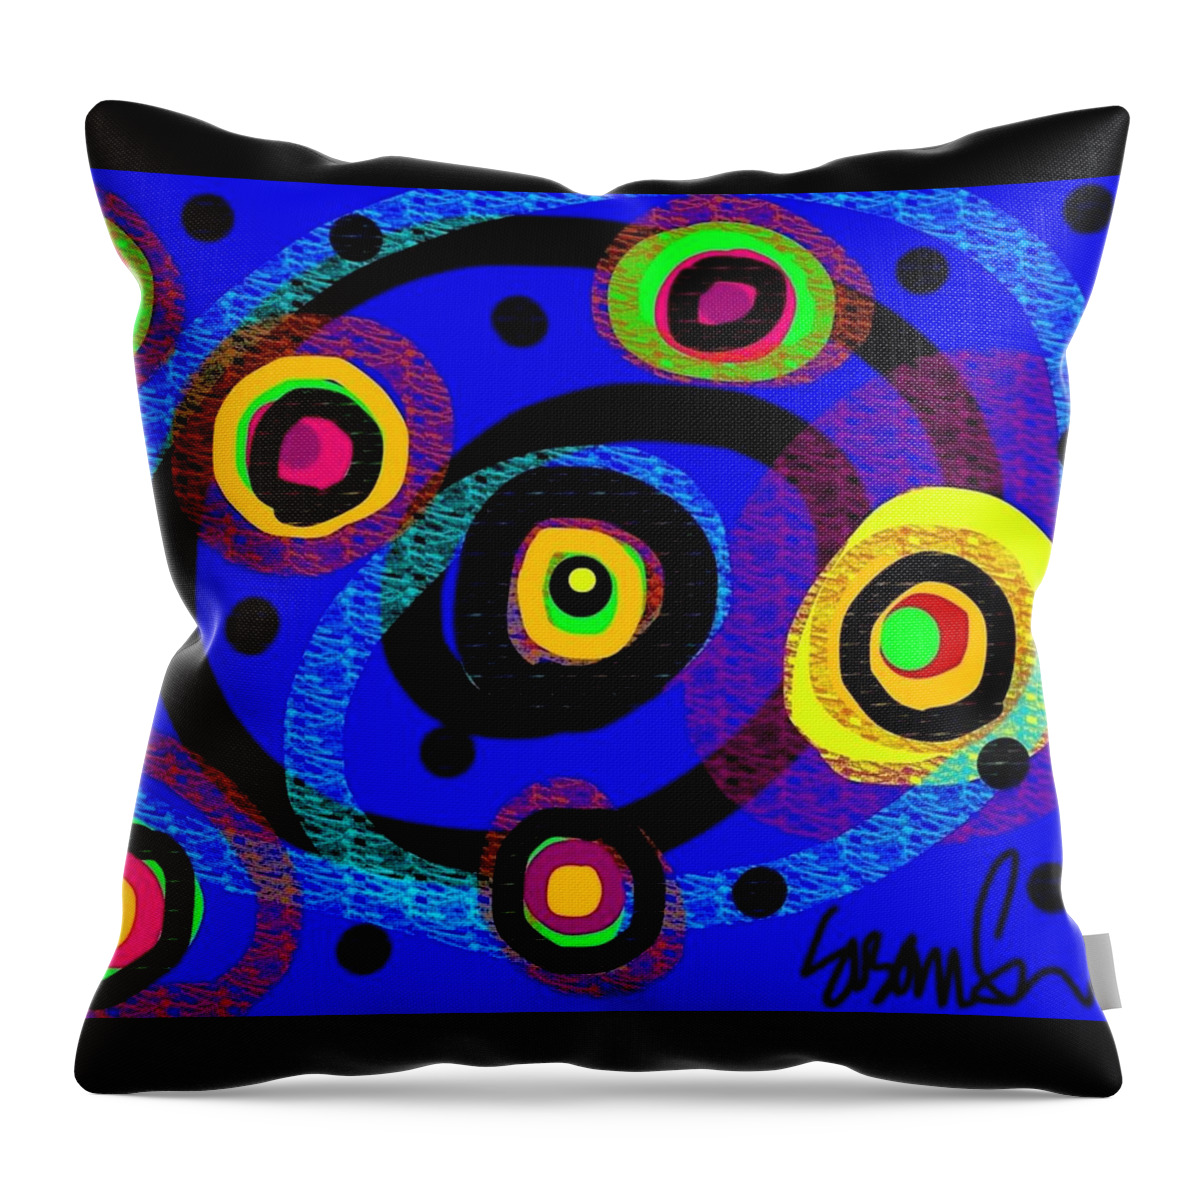 Abstract Throw Pillow featuring the digital art The Dancin Man in Memoriam to Patrick Swayze by Susan Fielder